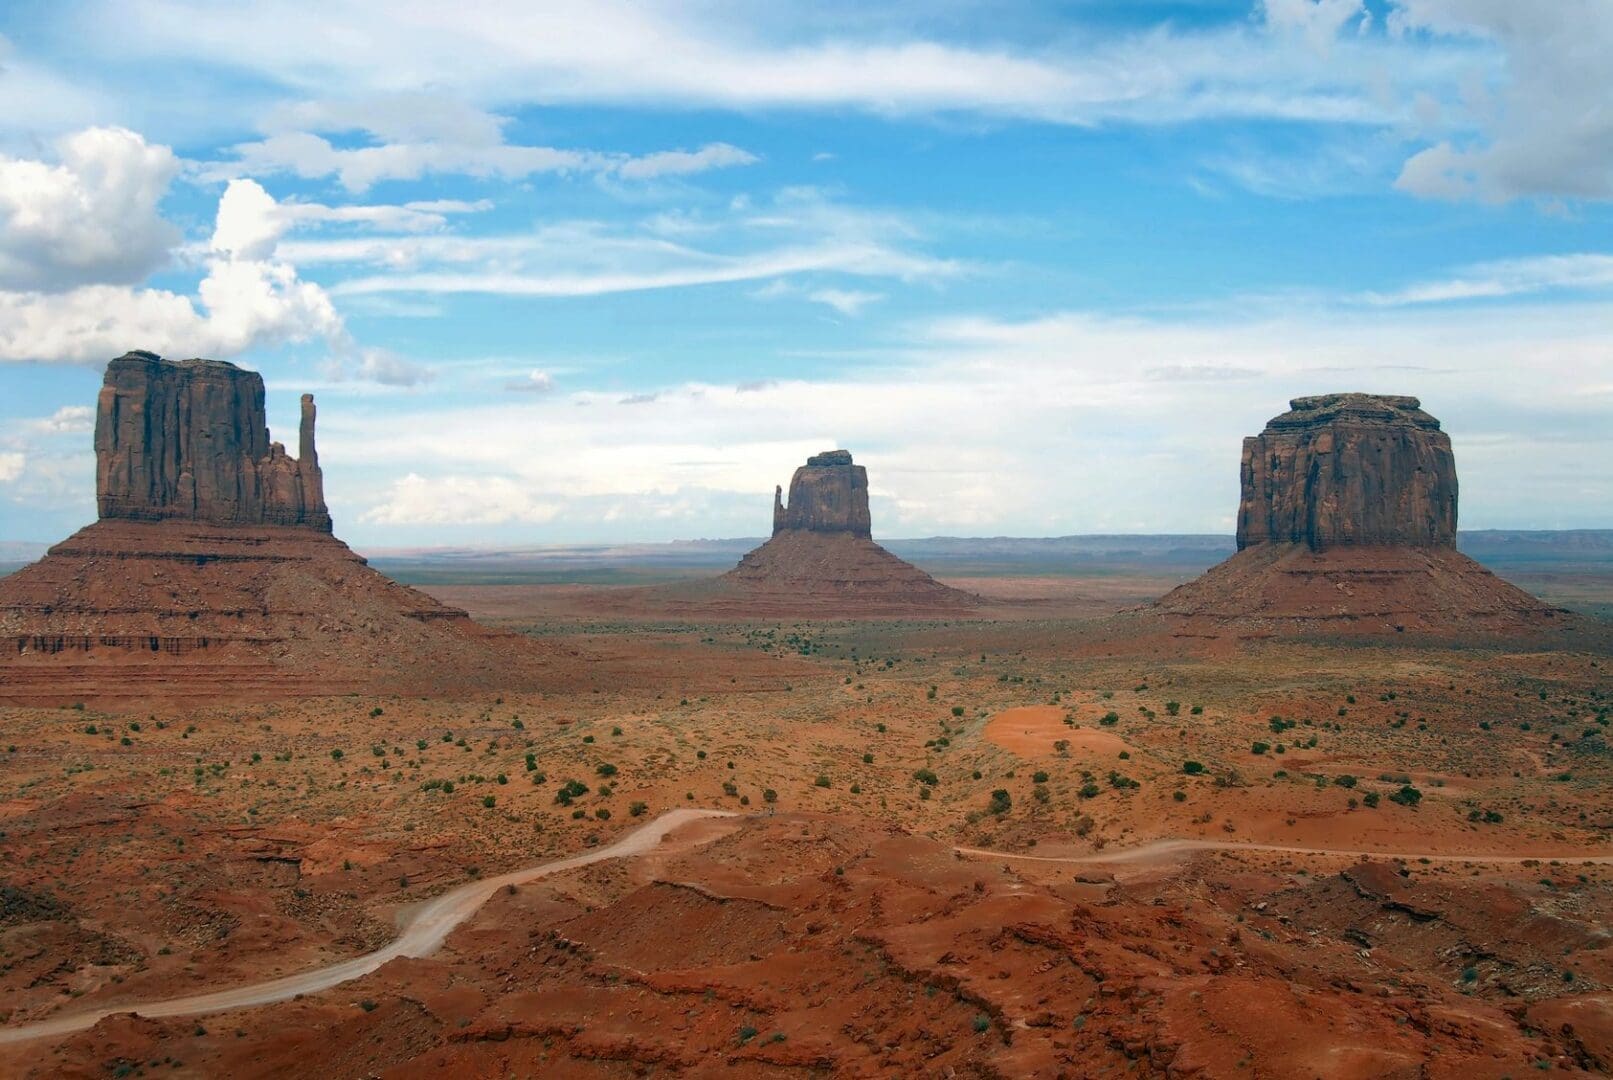 A view of the monument valley from the top of a hill.